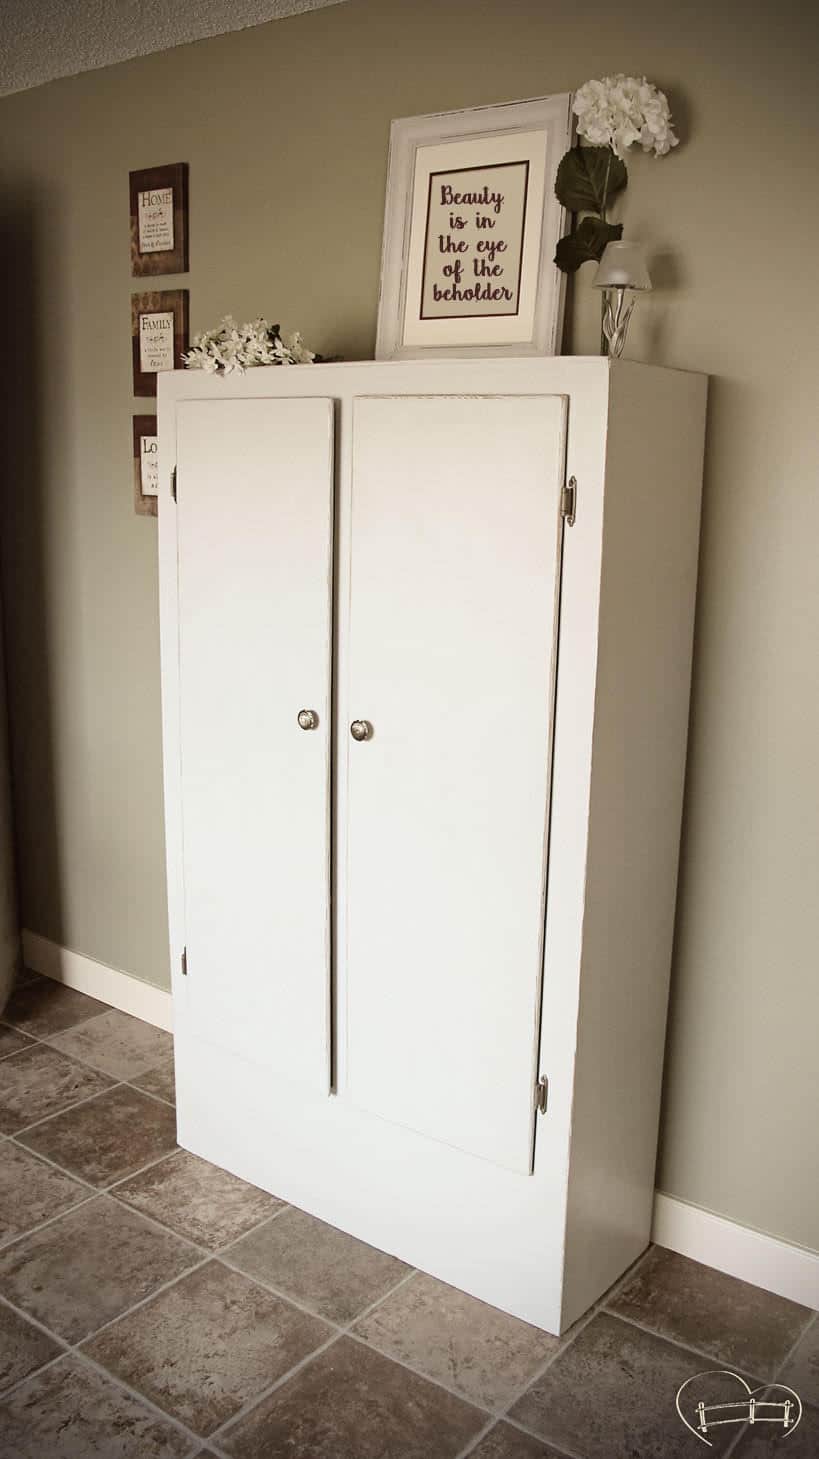 Beauty Is In the Eye of the Beholder #DIY #furniturepaint #paintedfurniture #grey #chalkpaint #upcycle #cabinet #storage #homedecor #contactpaper #laundryroom - blog.countrychicpaint.com